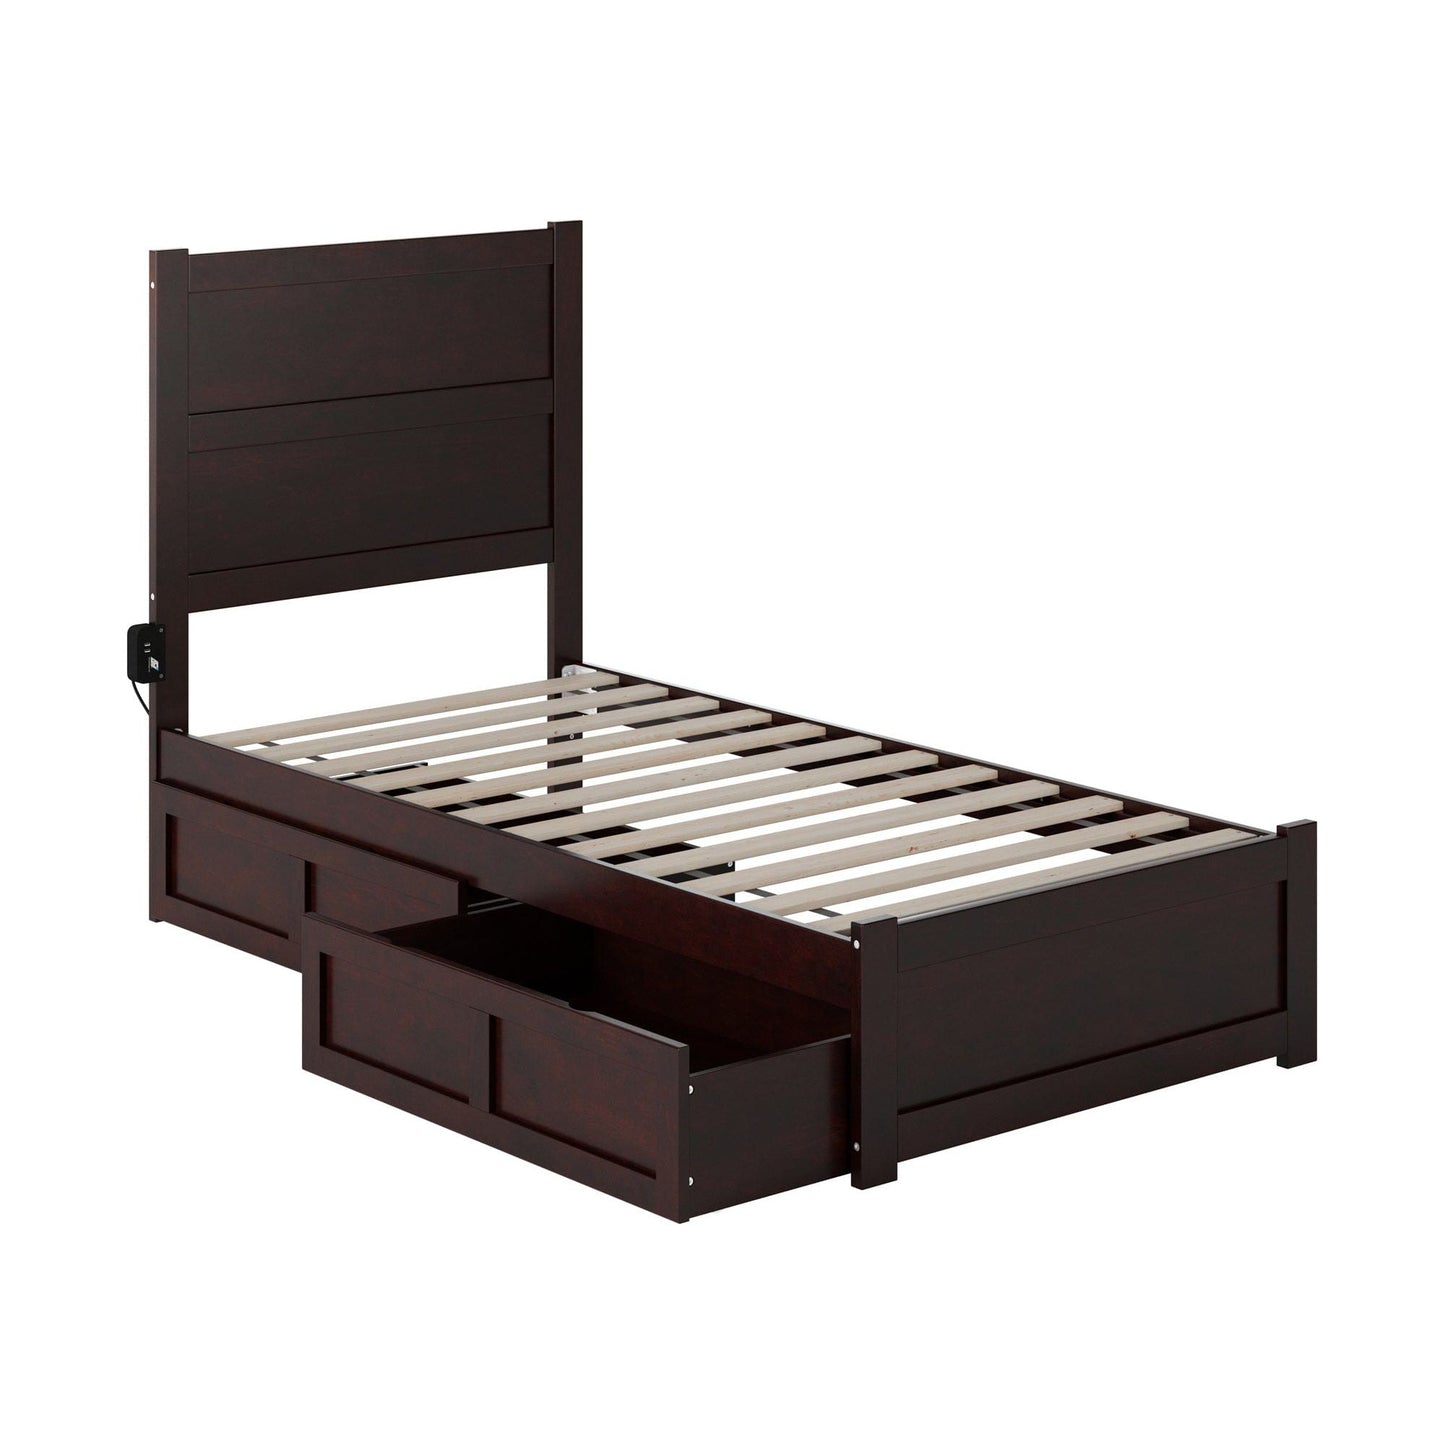 AFI Furnishings NoHo Twin Bed with Footboard and 2 Drawers in Espresso AG9163321